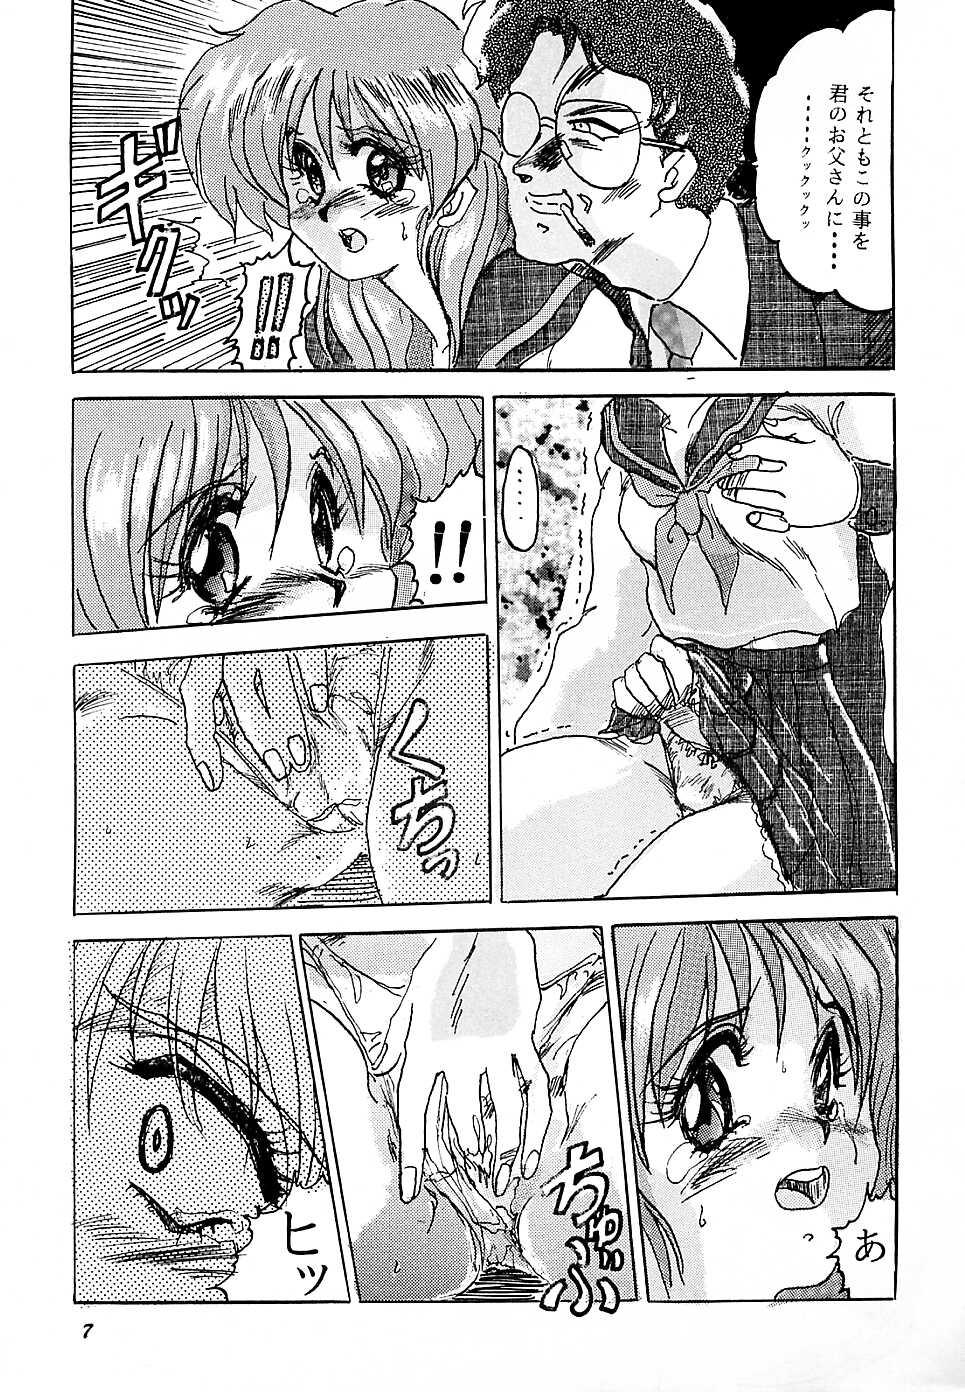 Orgame F 93C - Brave express might gaine Gangbang - Page 6